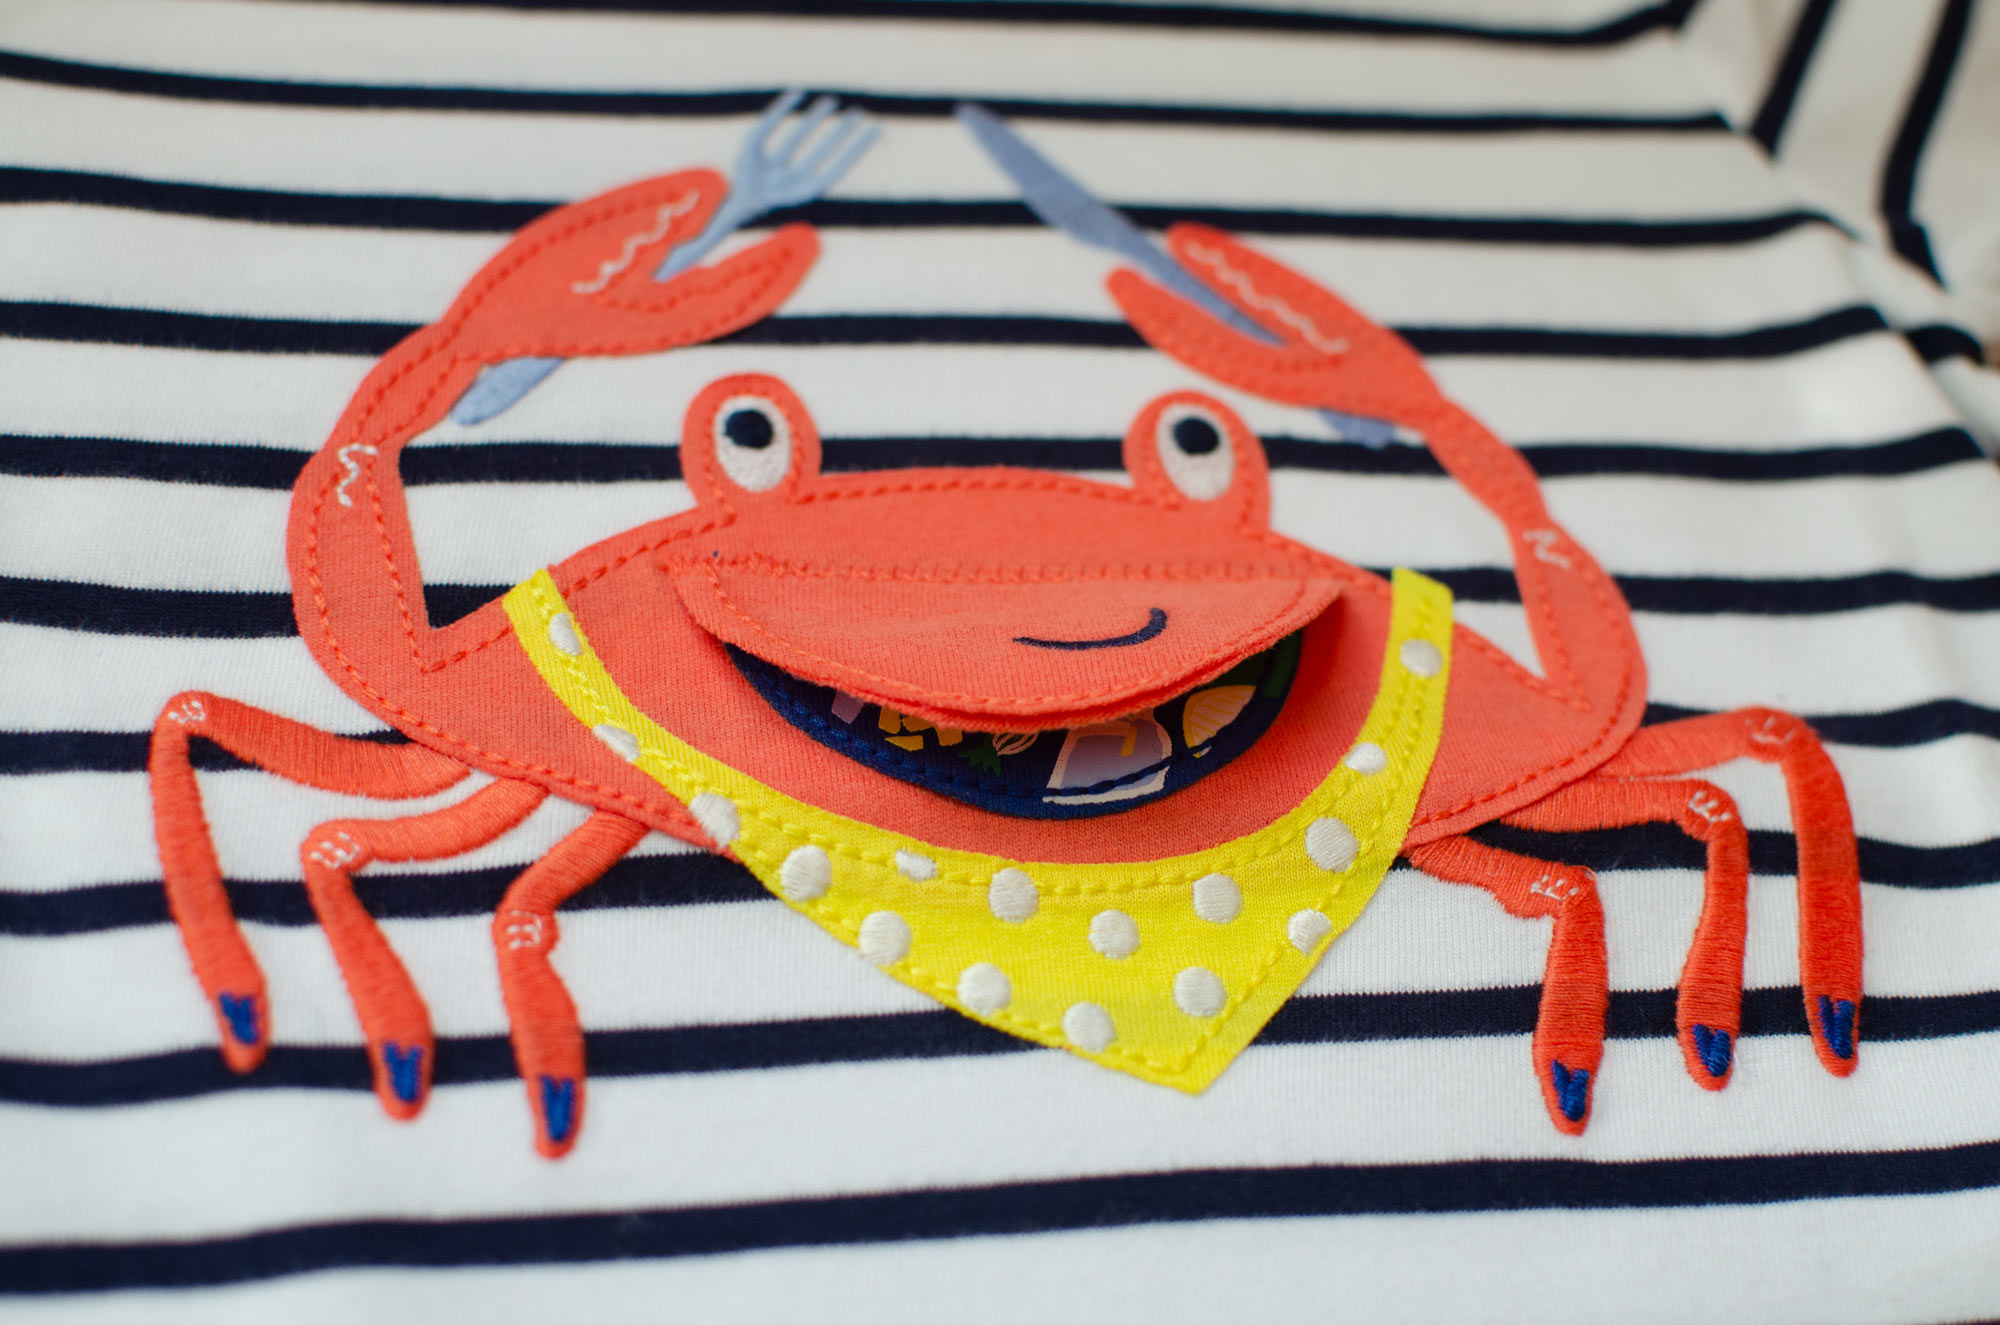 Crab chomp applique designed by Elly Jahnz for Joules Clothing